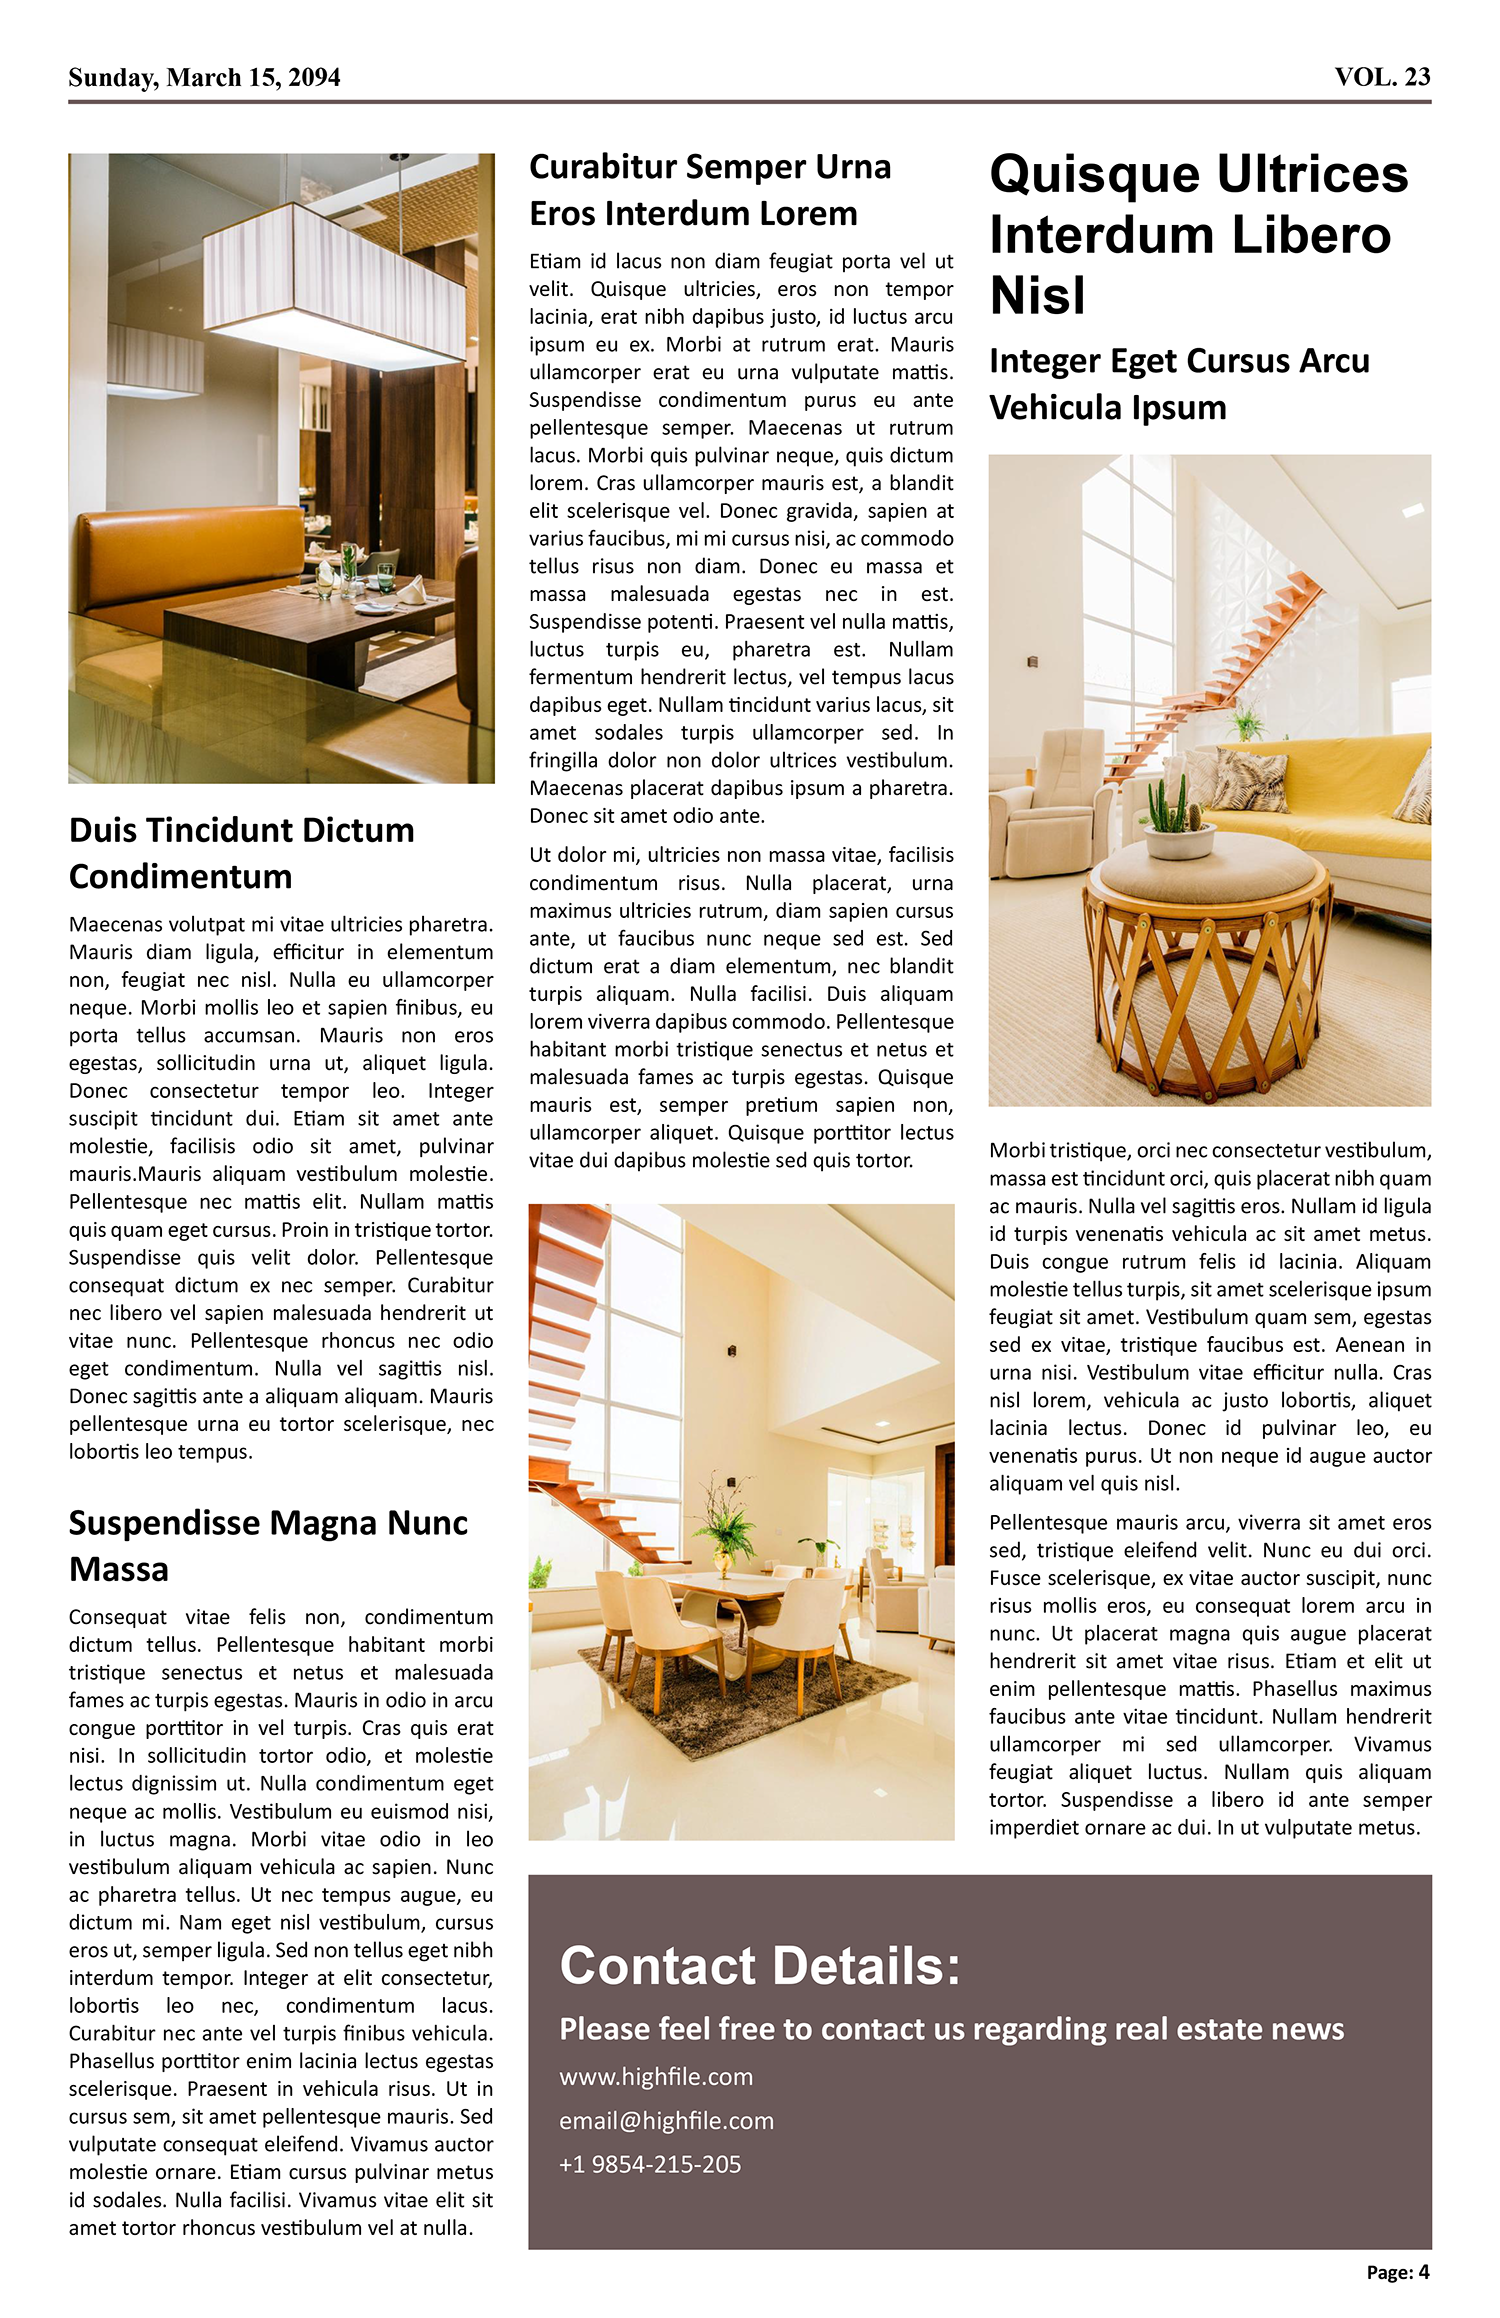 Real Estate Newspaper Article Template - Page 04